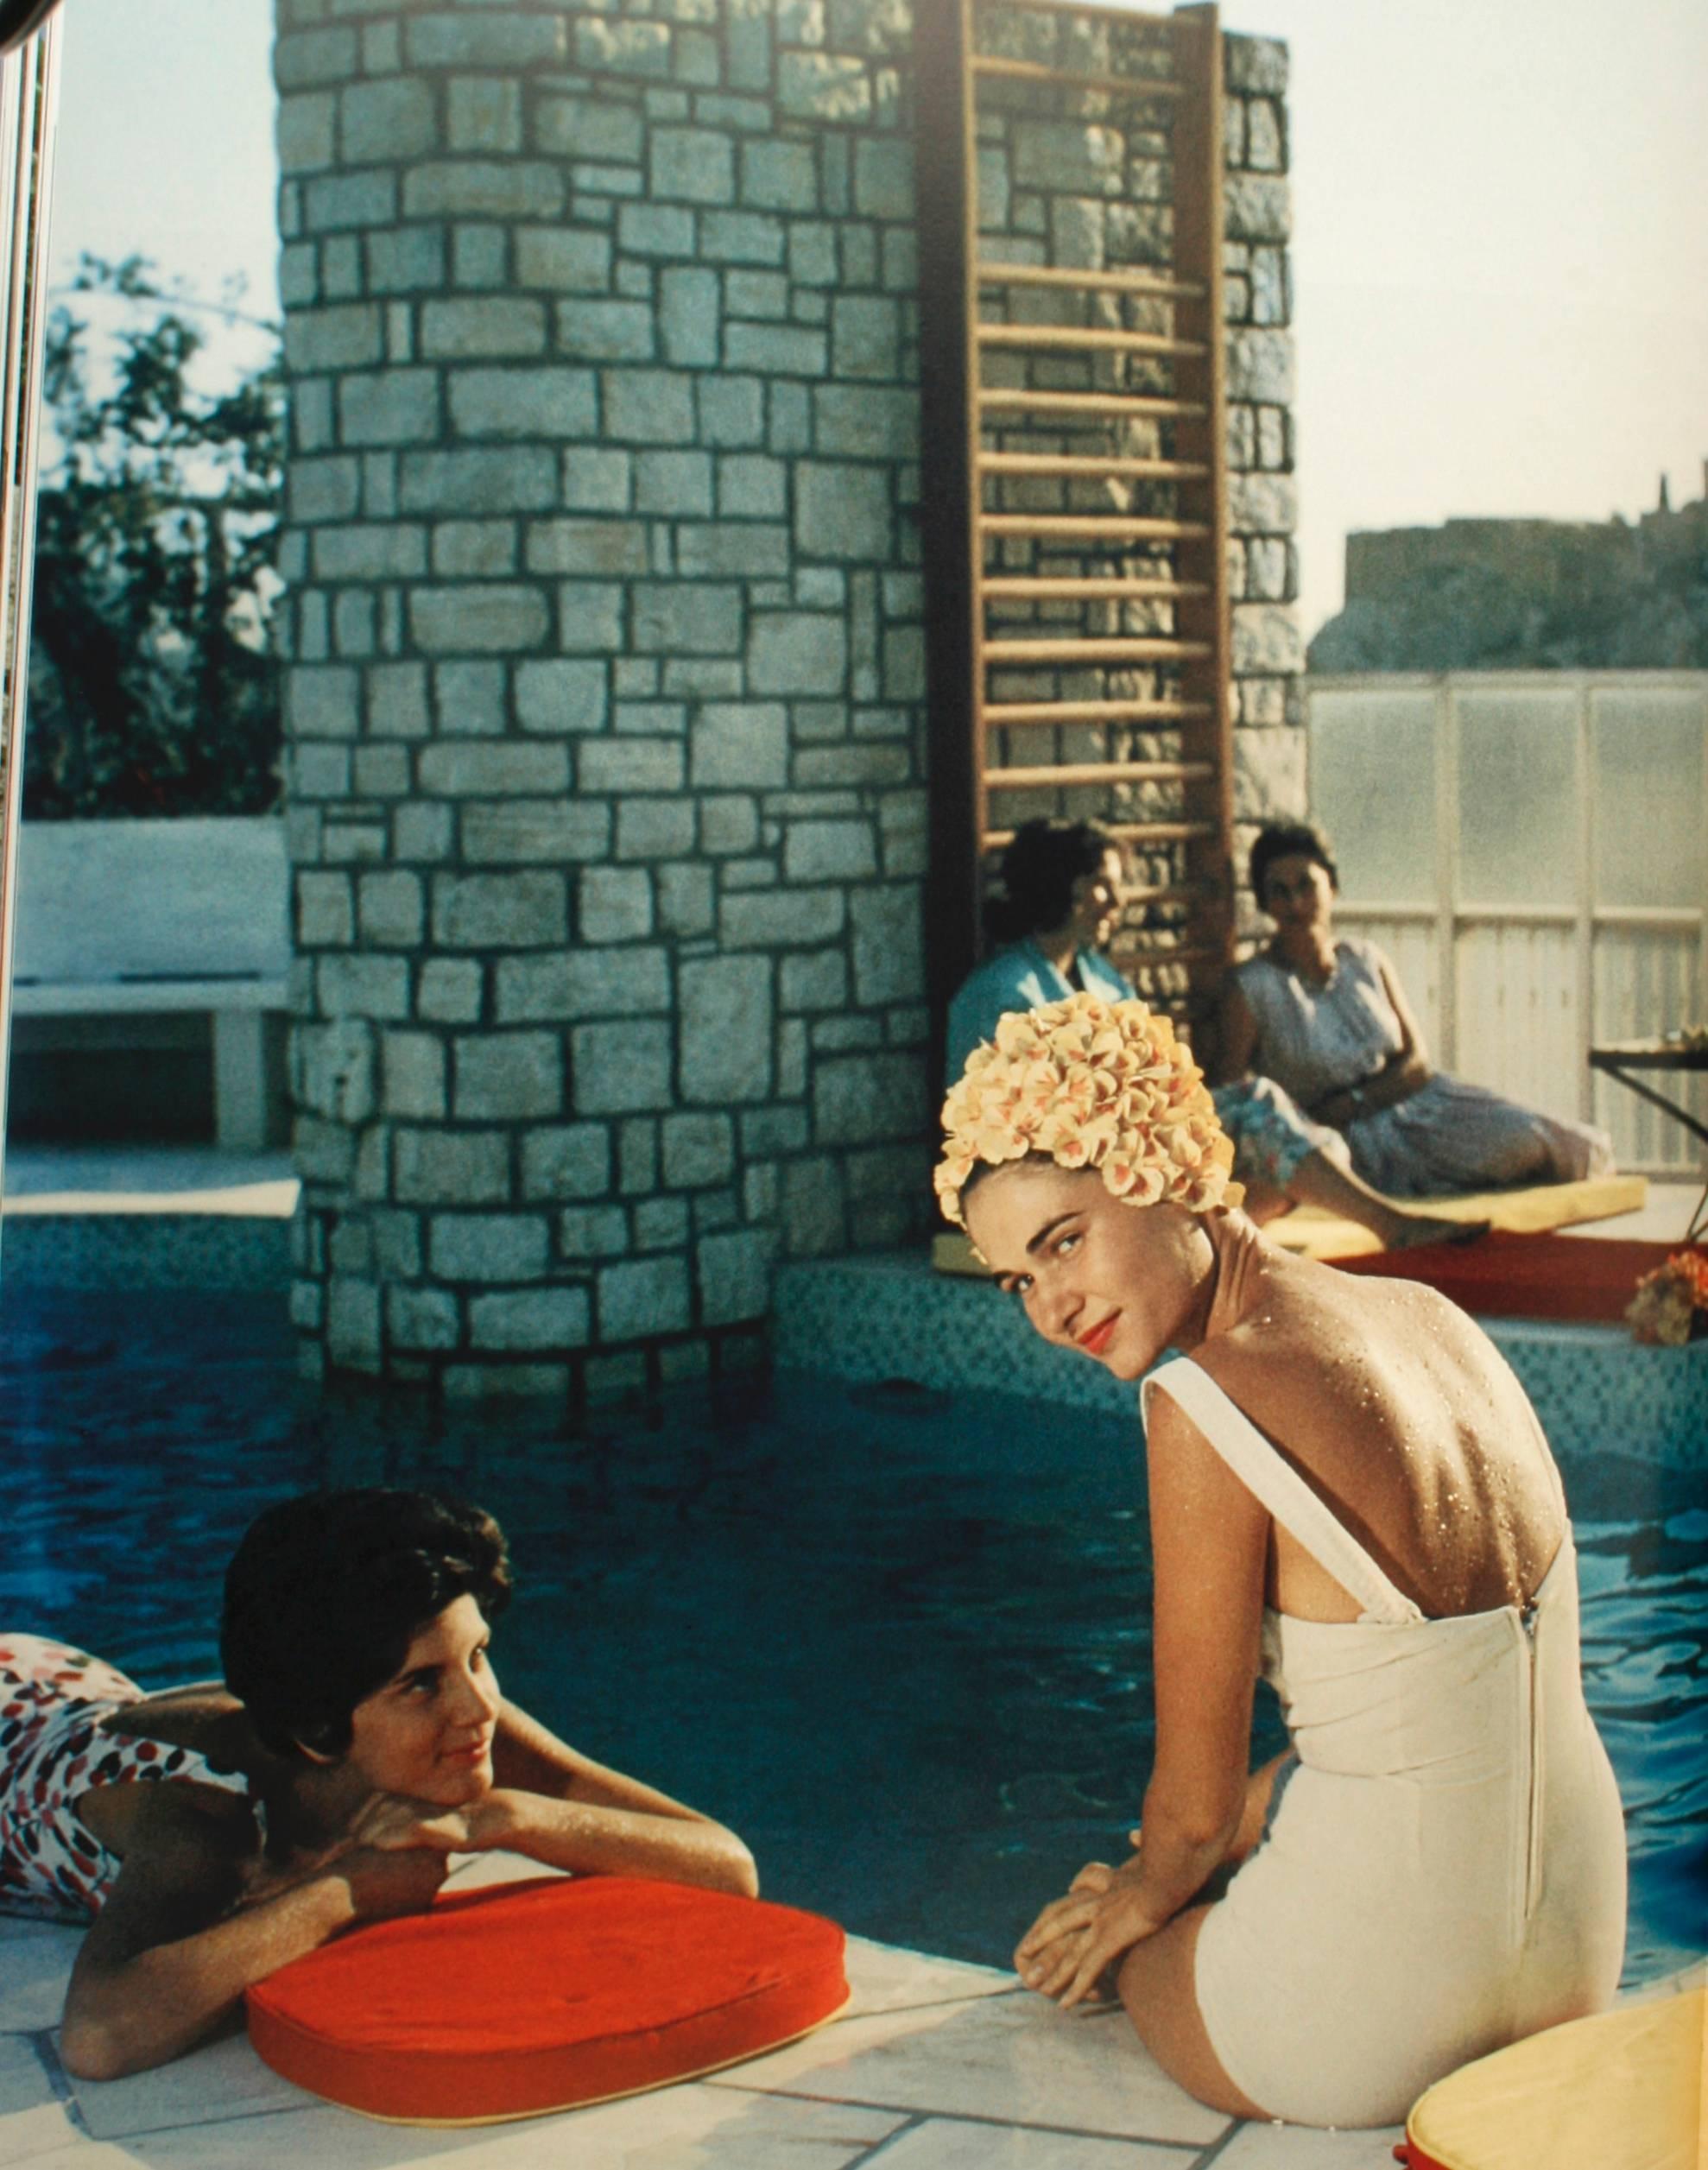 Poolside with Slim Aarons, first edition, by Slim Aarons. Harry N. Abrams, New York, NY, 2007. Hardcover with dust jacket. Great photographs, another Classic by Slim Aarons who was noted for his photos of the rich and famous. 240pp. with 275 color